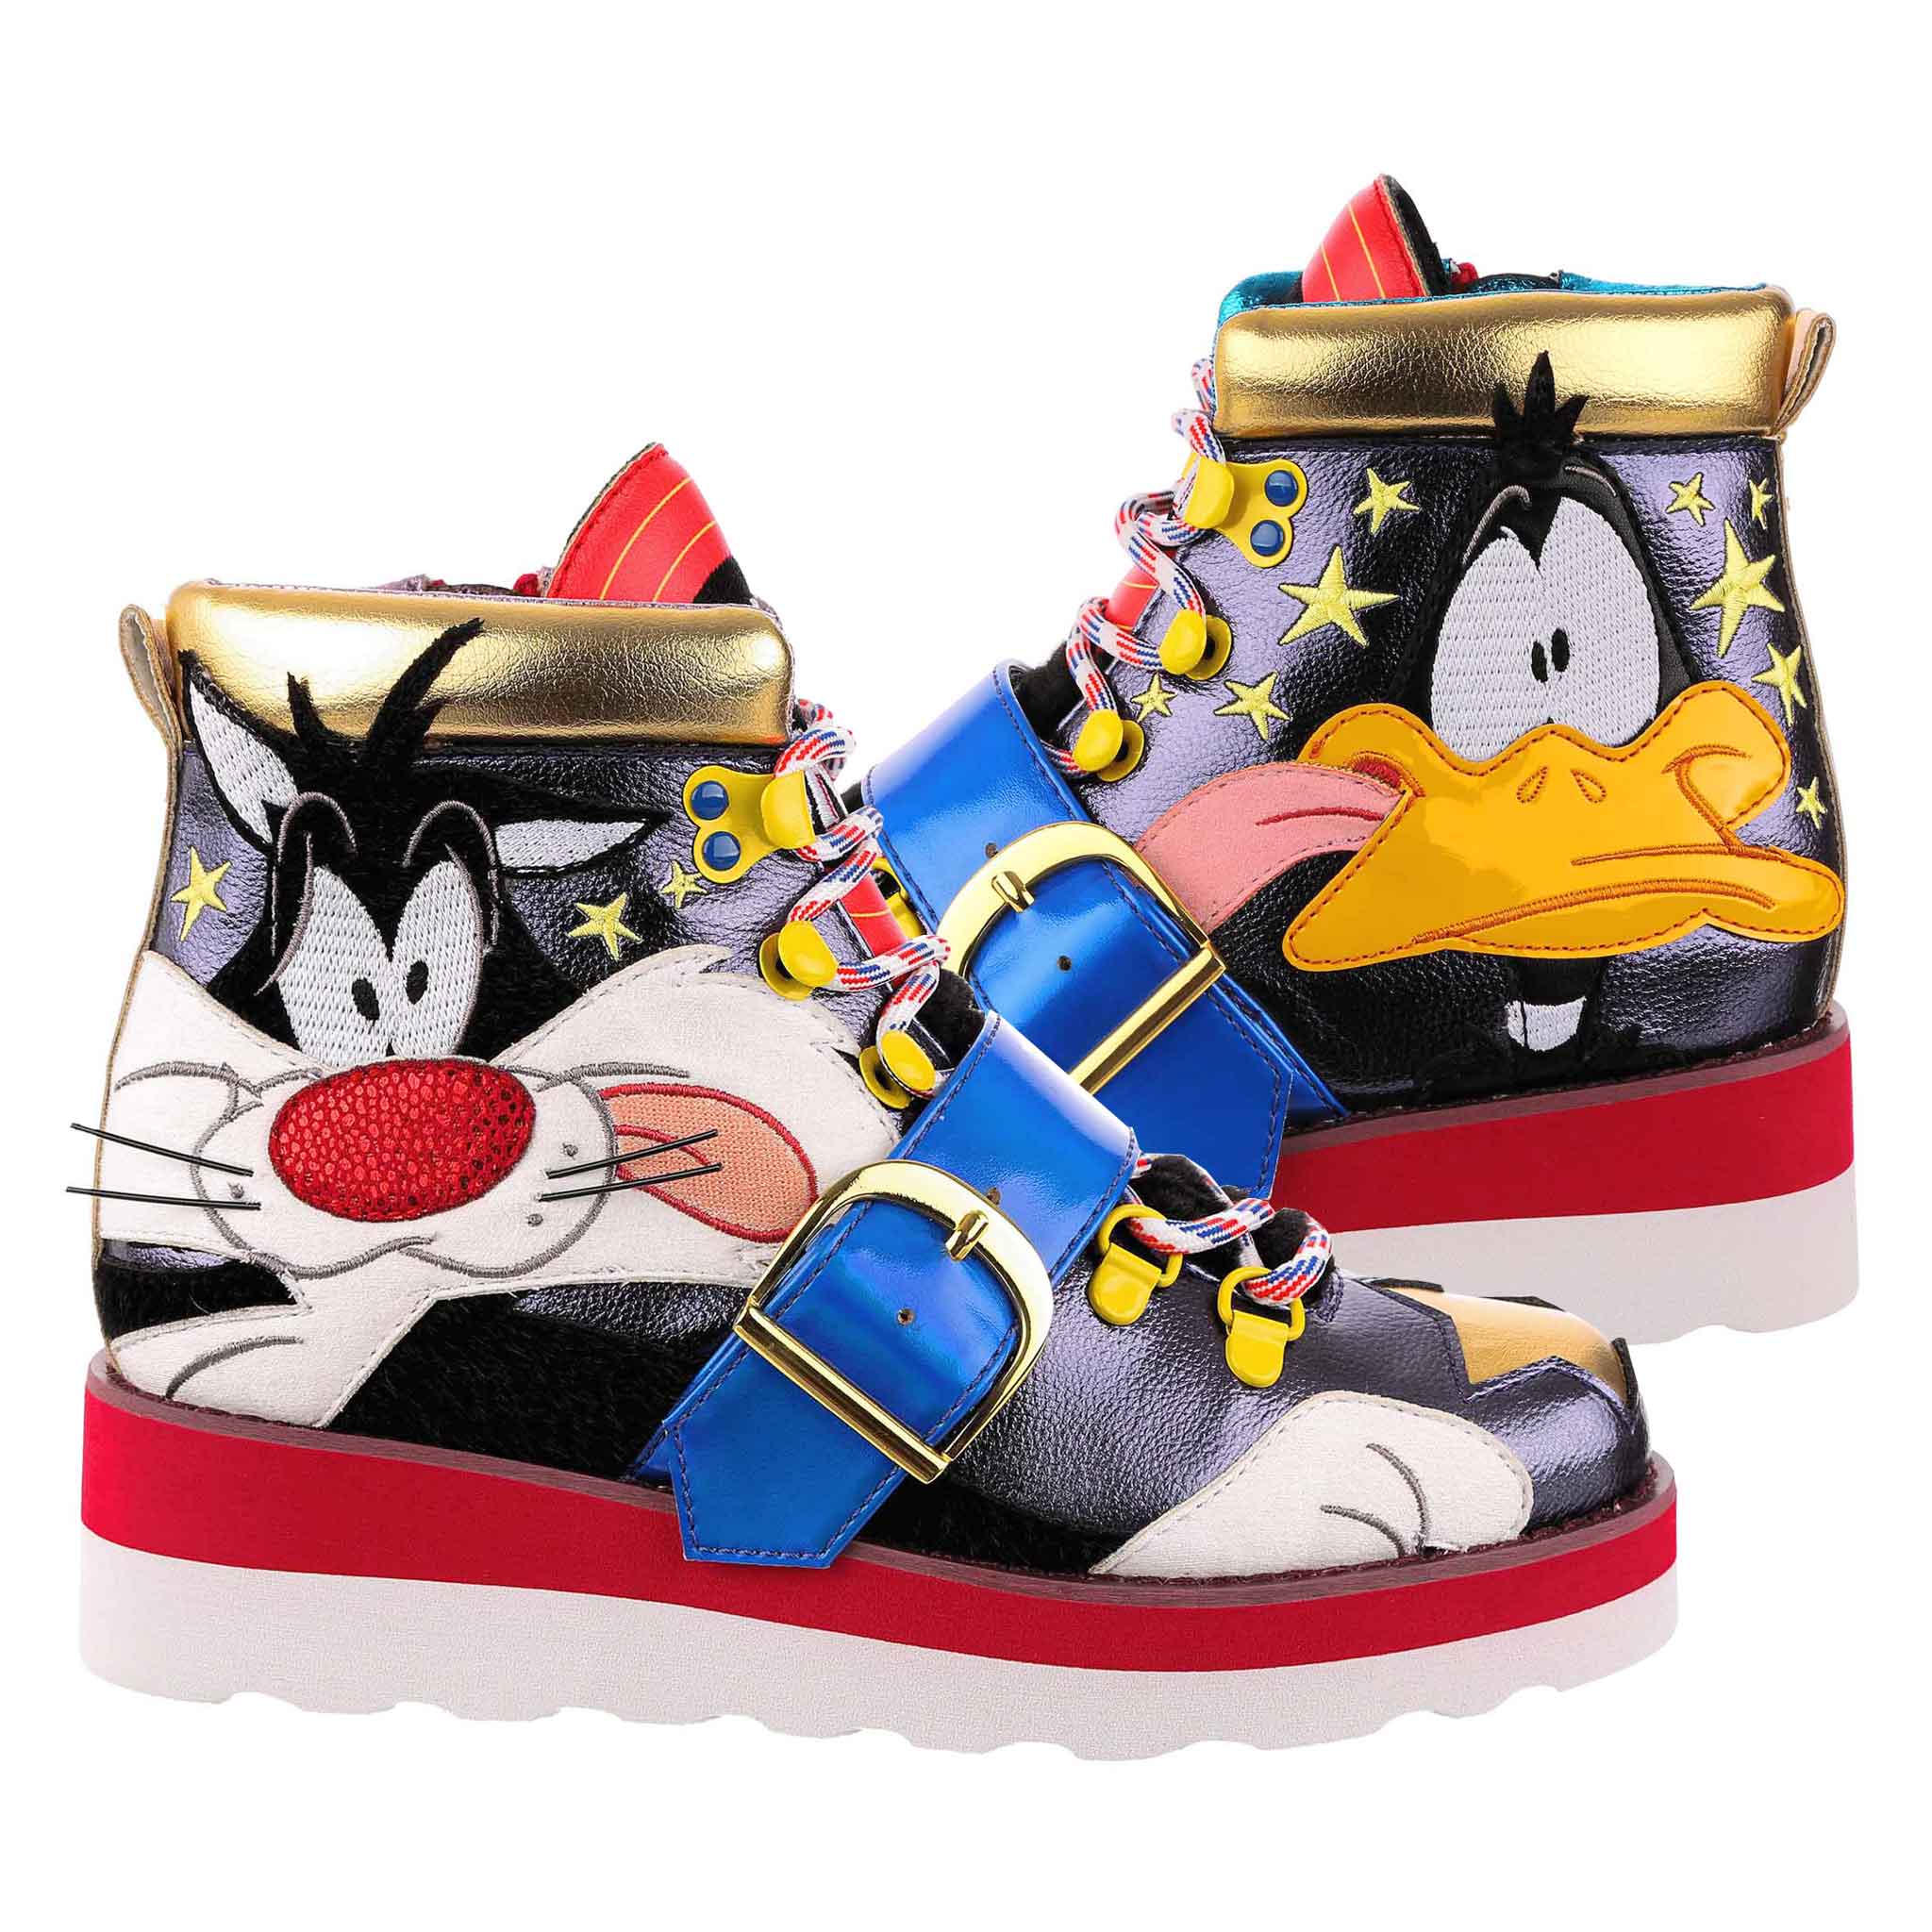 High top unisex trainers with metallic navy fabric, on the left foot is Daffy Duck, and the right foot is Sylvester the Cat, who are made from a combination of embroidery and applique. Finished with striped laces and a statement bright blue strap across the laces with a gold buckle.